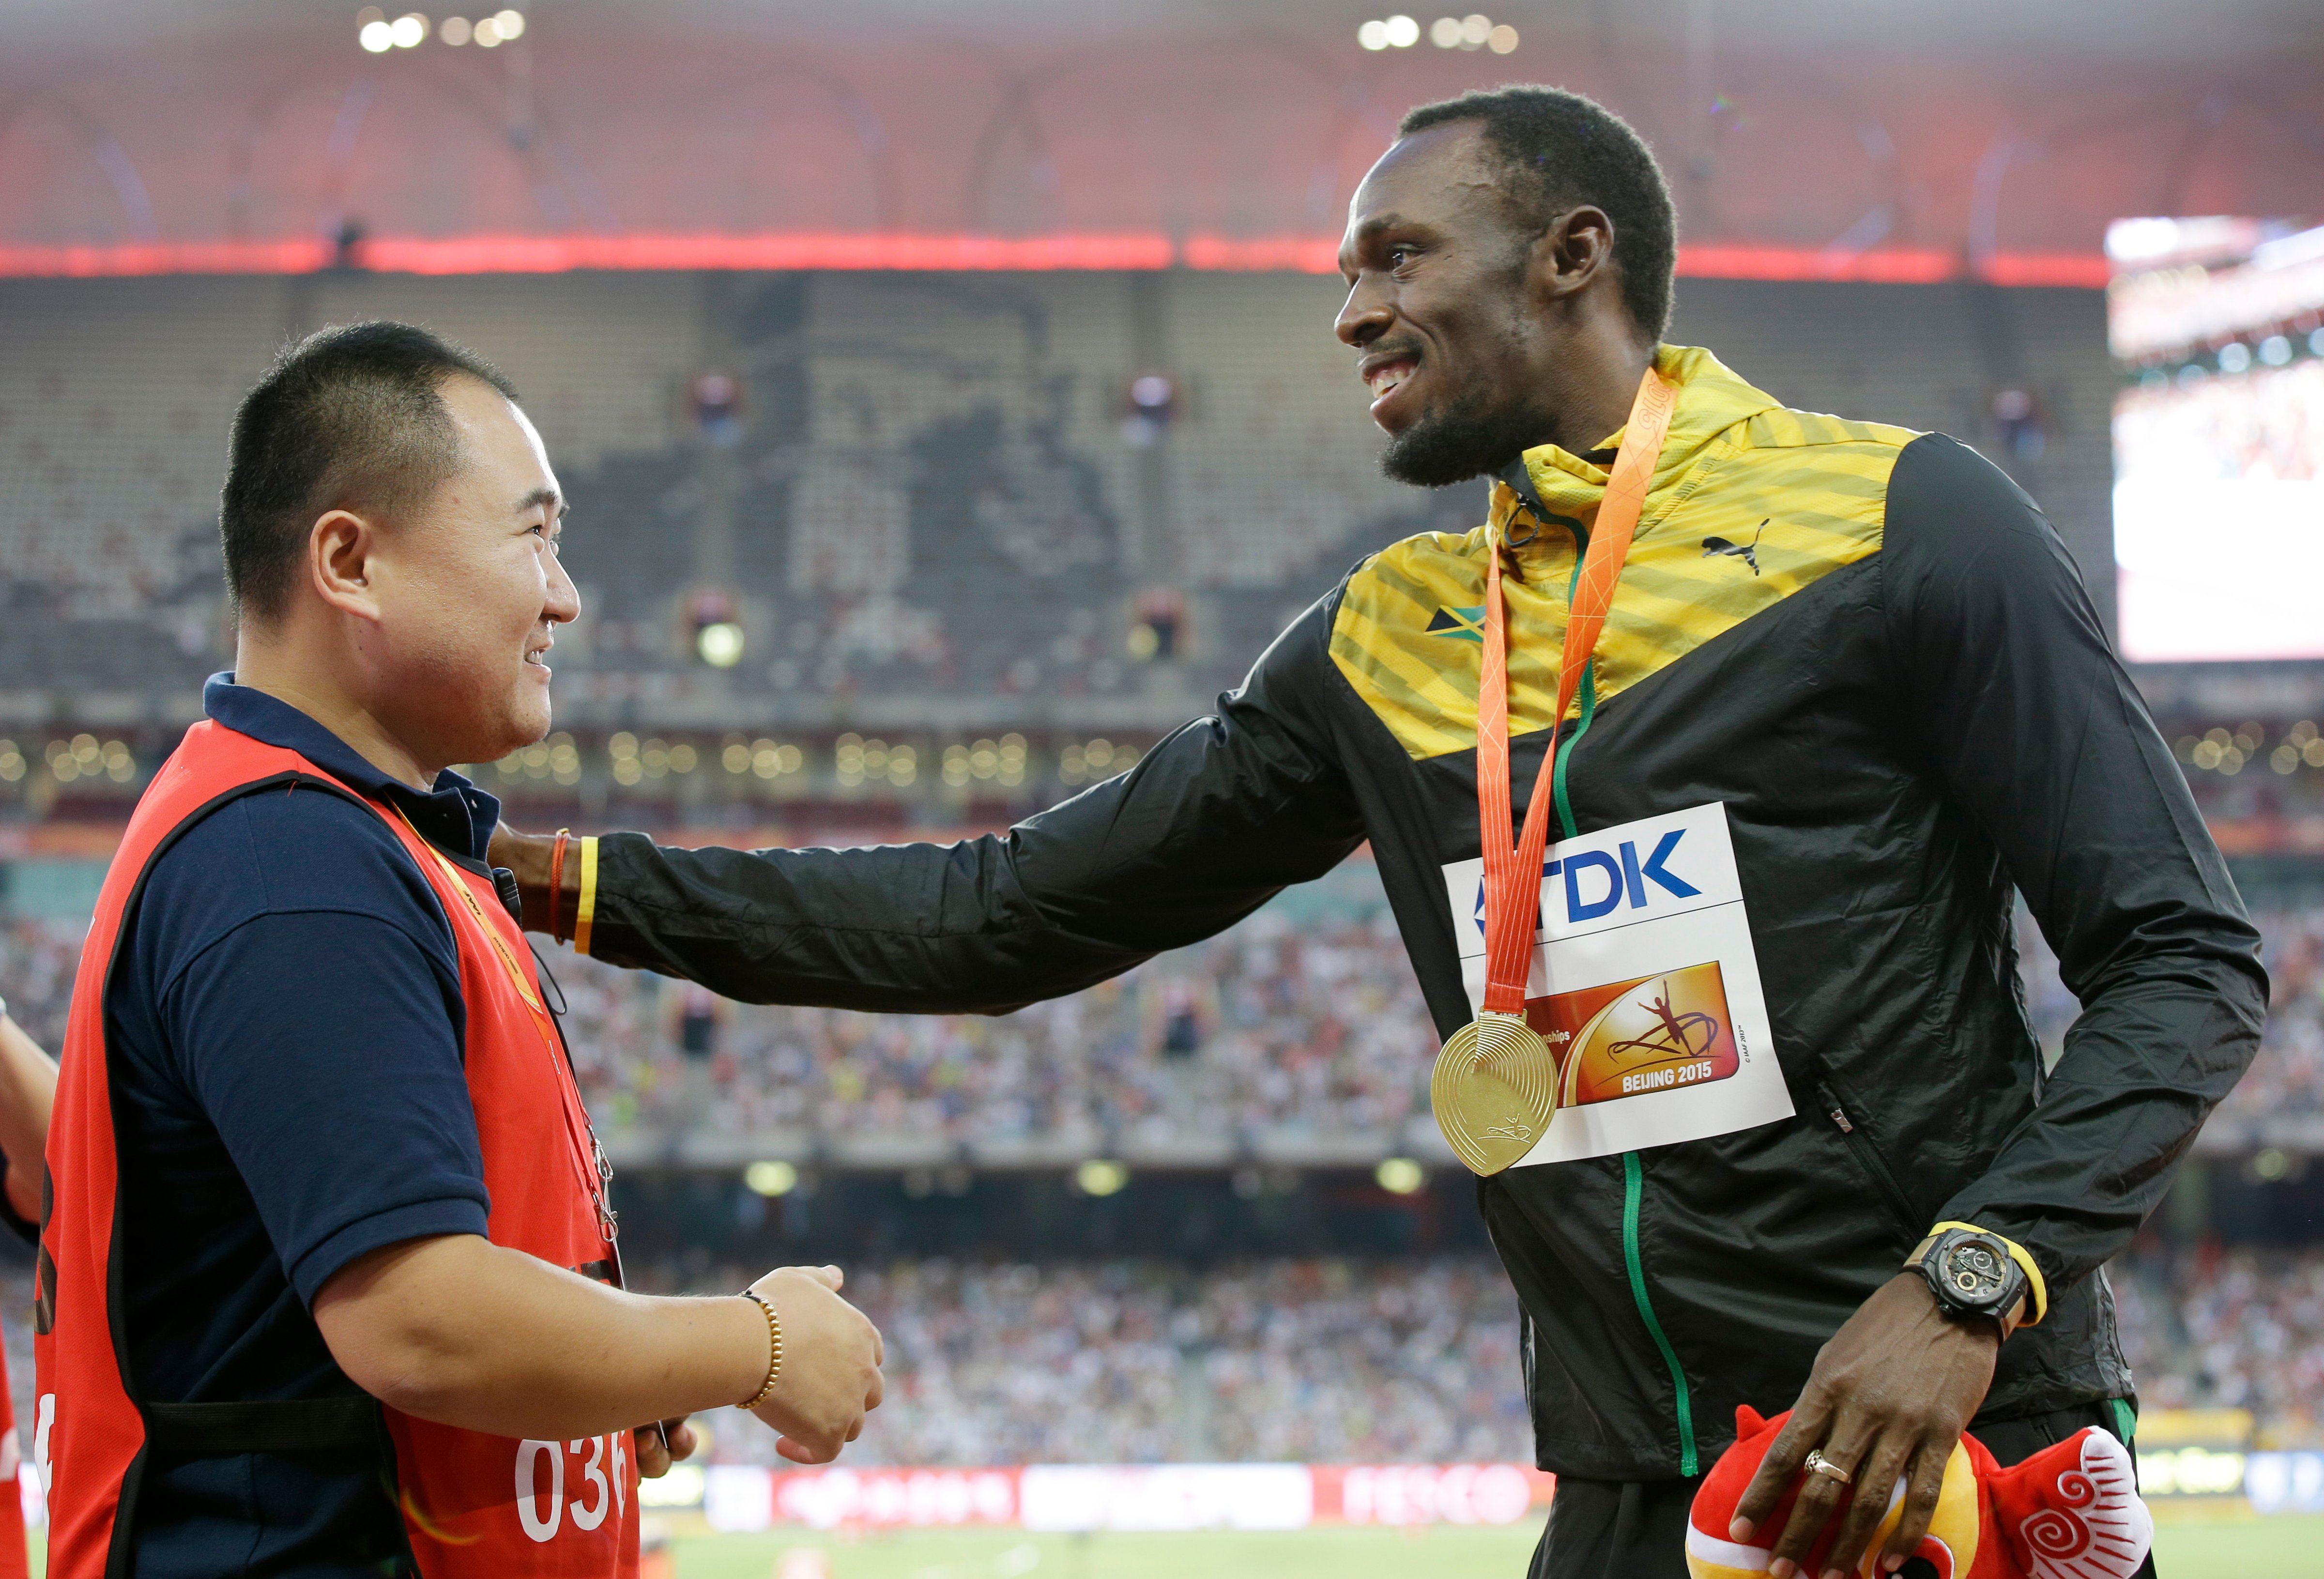 Jamaica's Usain Bolt, left, receives a gift from the cameraman who hit Bolt with a segway after the 200m final on Aug. 27. (Kin Cheung—AP)